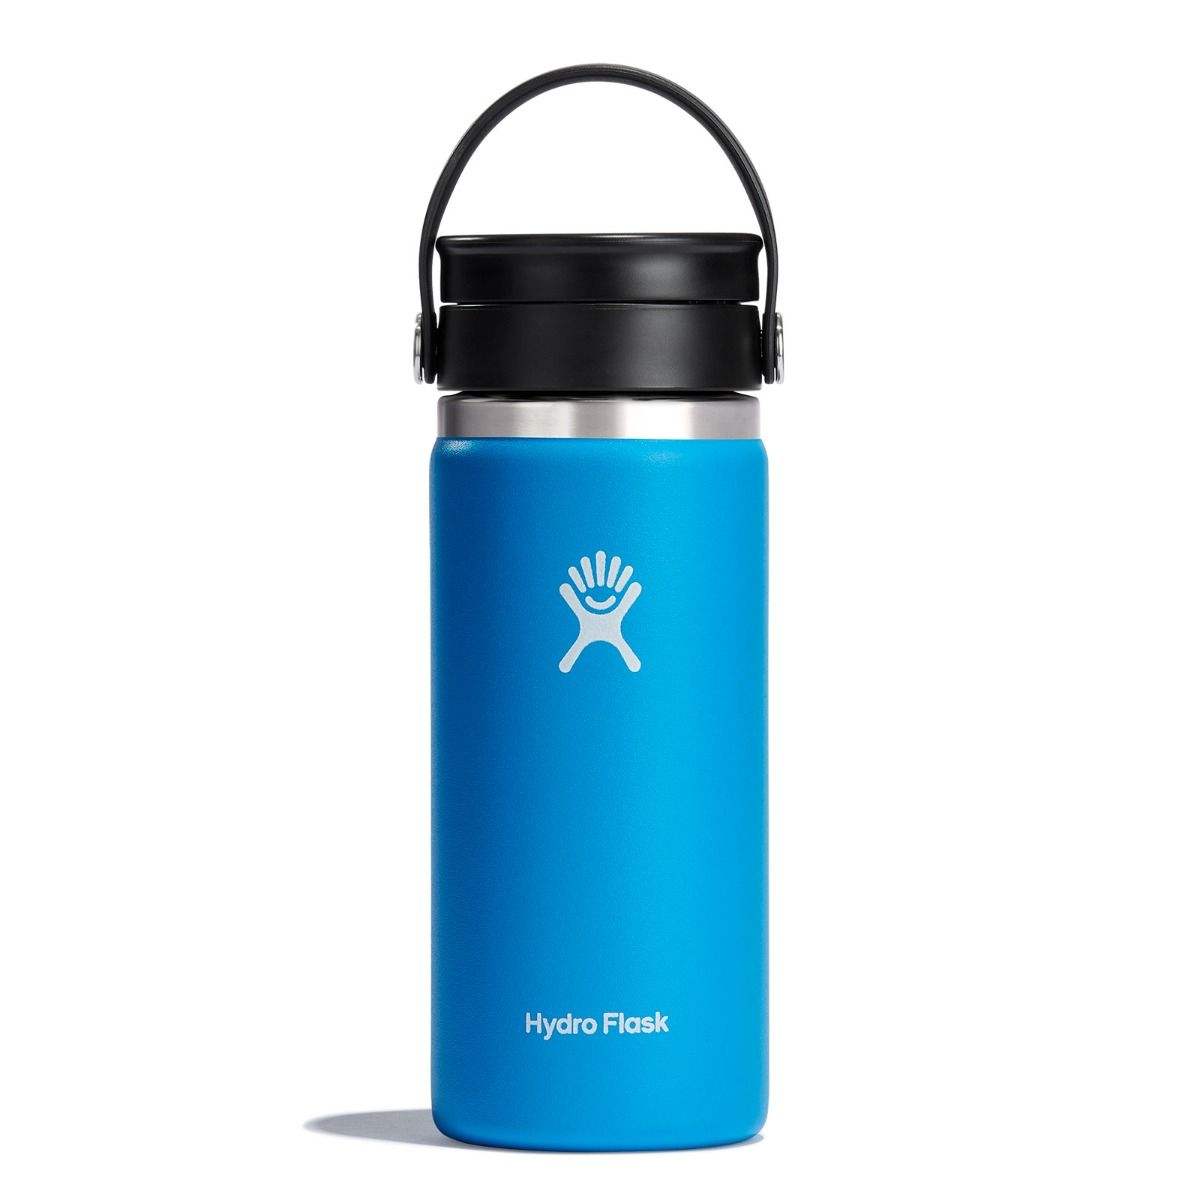 16 oz Coffee Flask w/ Flex Sip Lid ny Hydro Flask - The Luxury Promotional Gifts Company Limited